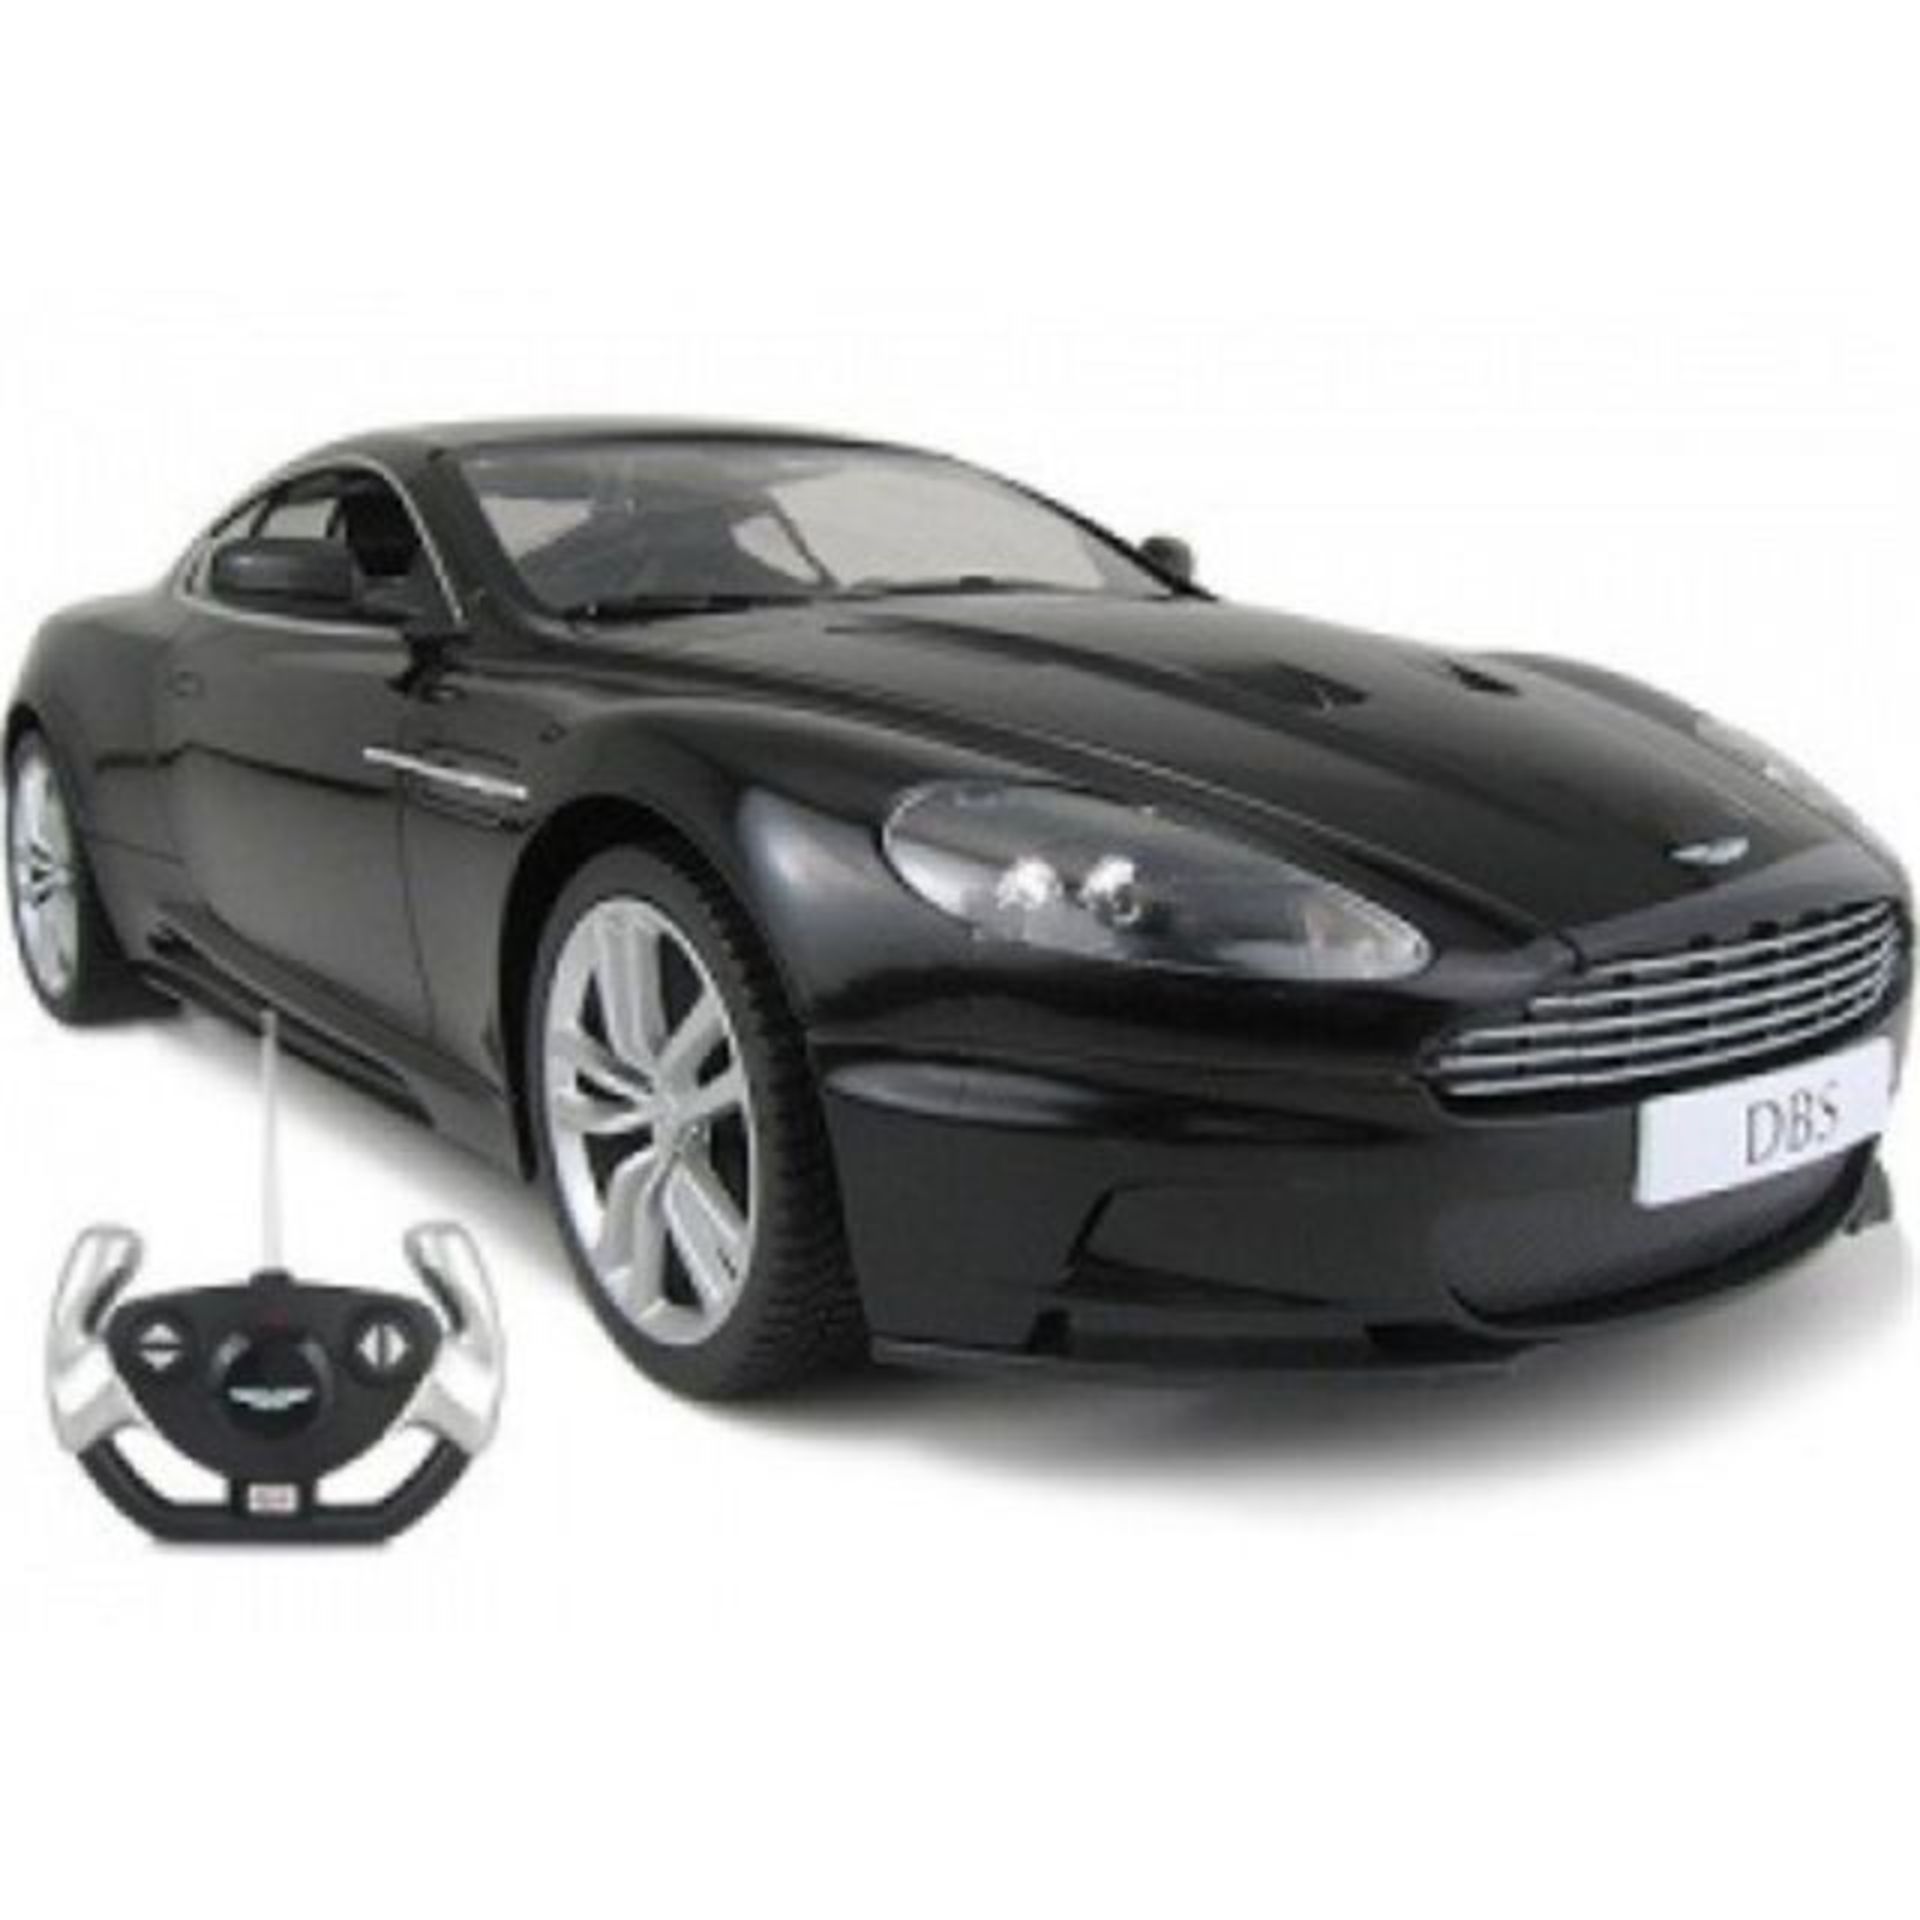 V *TRADE QTY* Brand New 1:24 Scale R/C Aston Martin DBS Coupe Full Function (Forward/Reverse/Right/